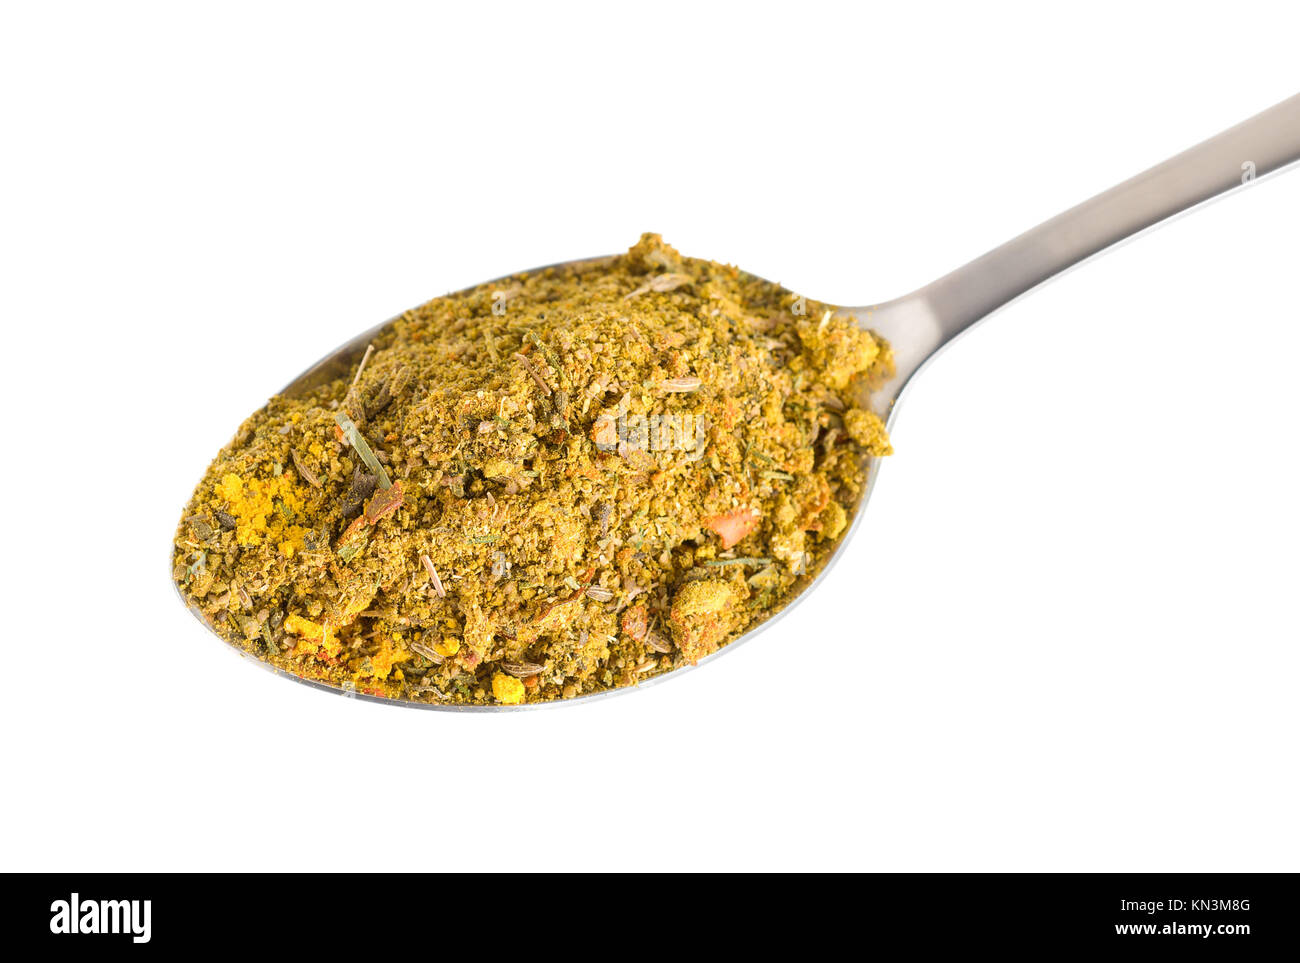 https://c8.alamy.com/comp/KN3M8G/crushed-asian-spices-in-a-spoon-isolated-on-white-background-KN3M8G.jpg